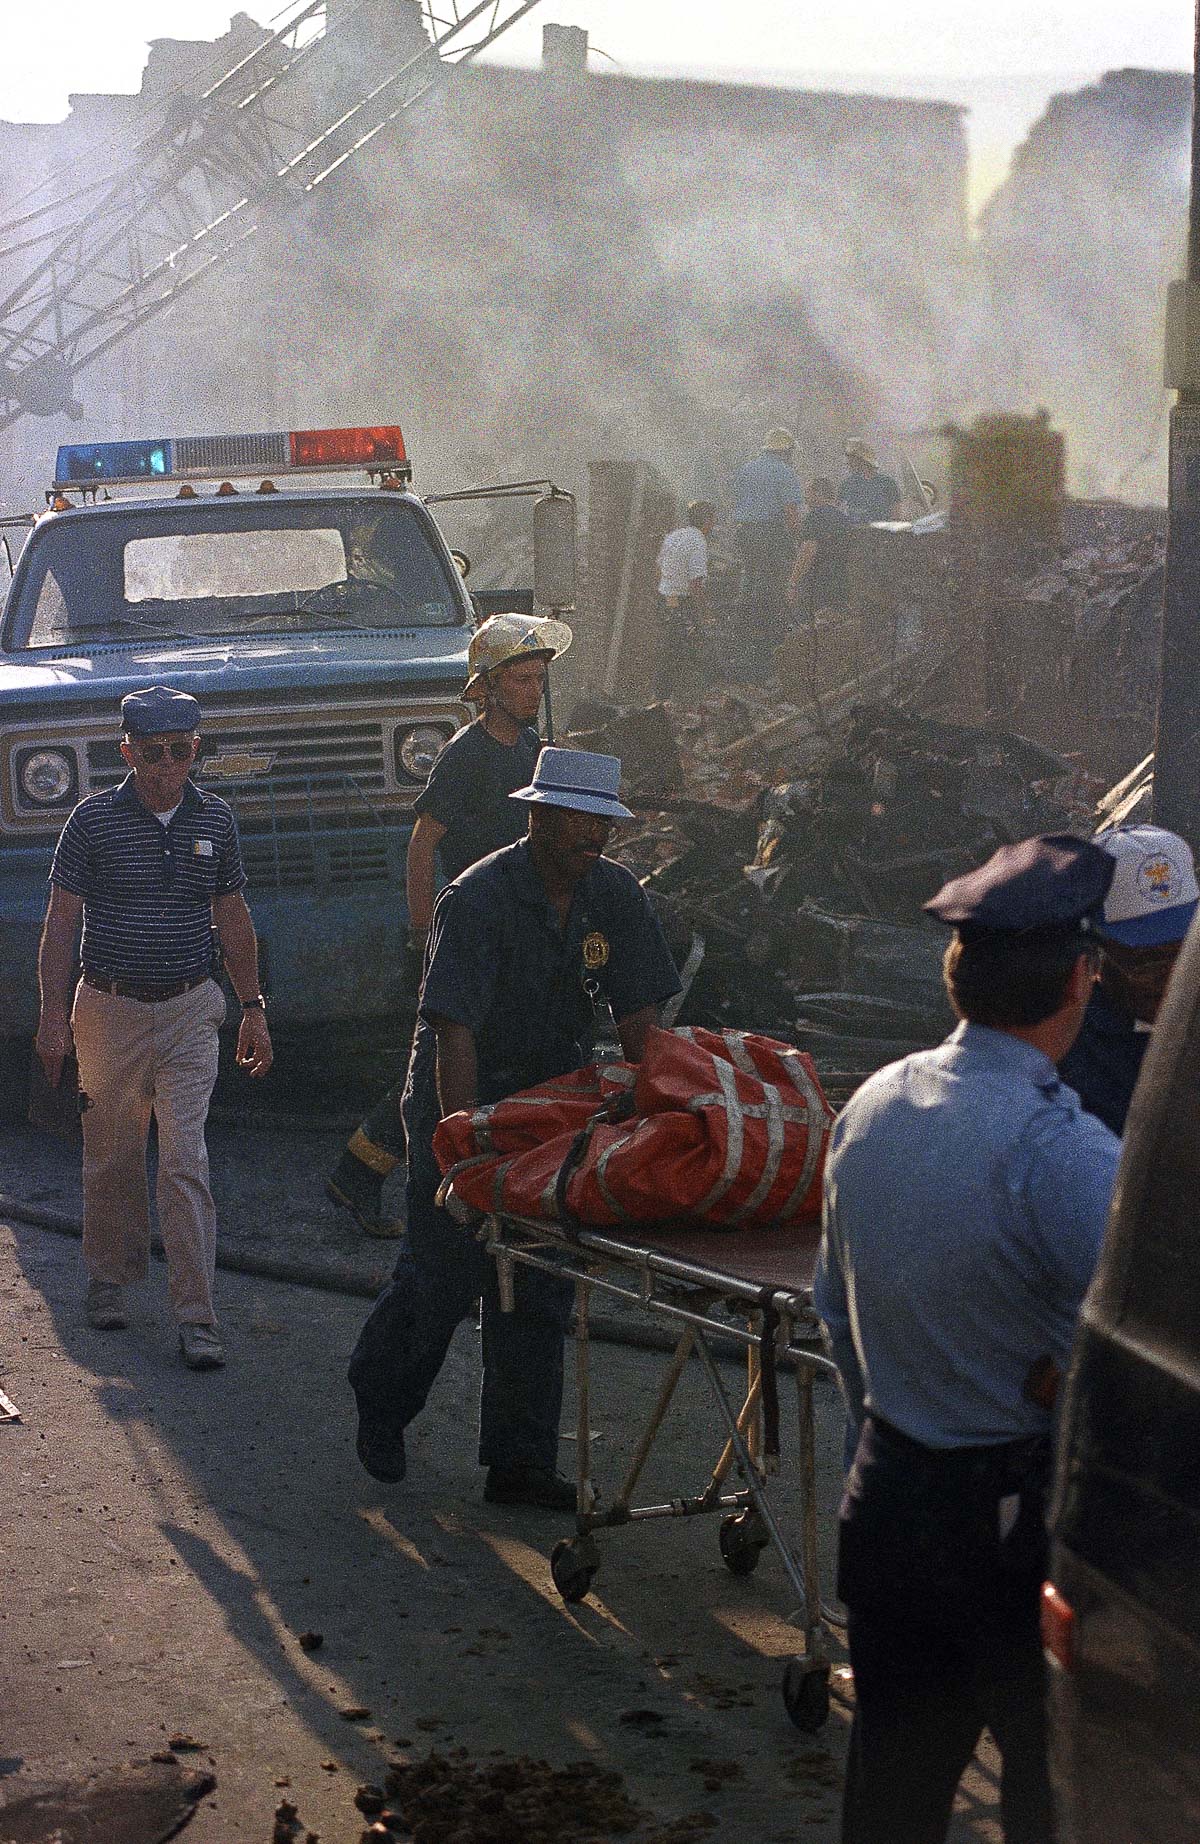 Workers remove the remains of a body from the rubble. May 14, 1985